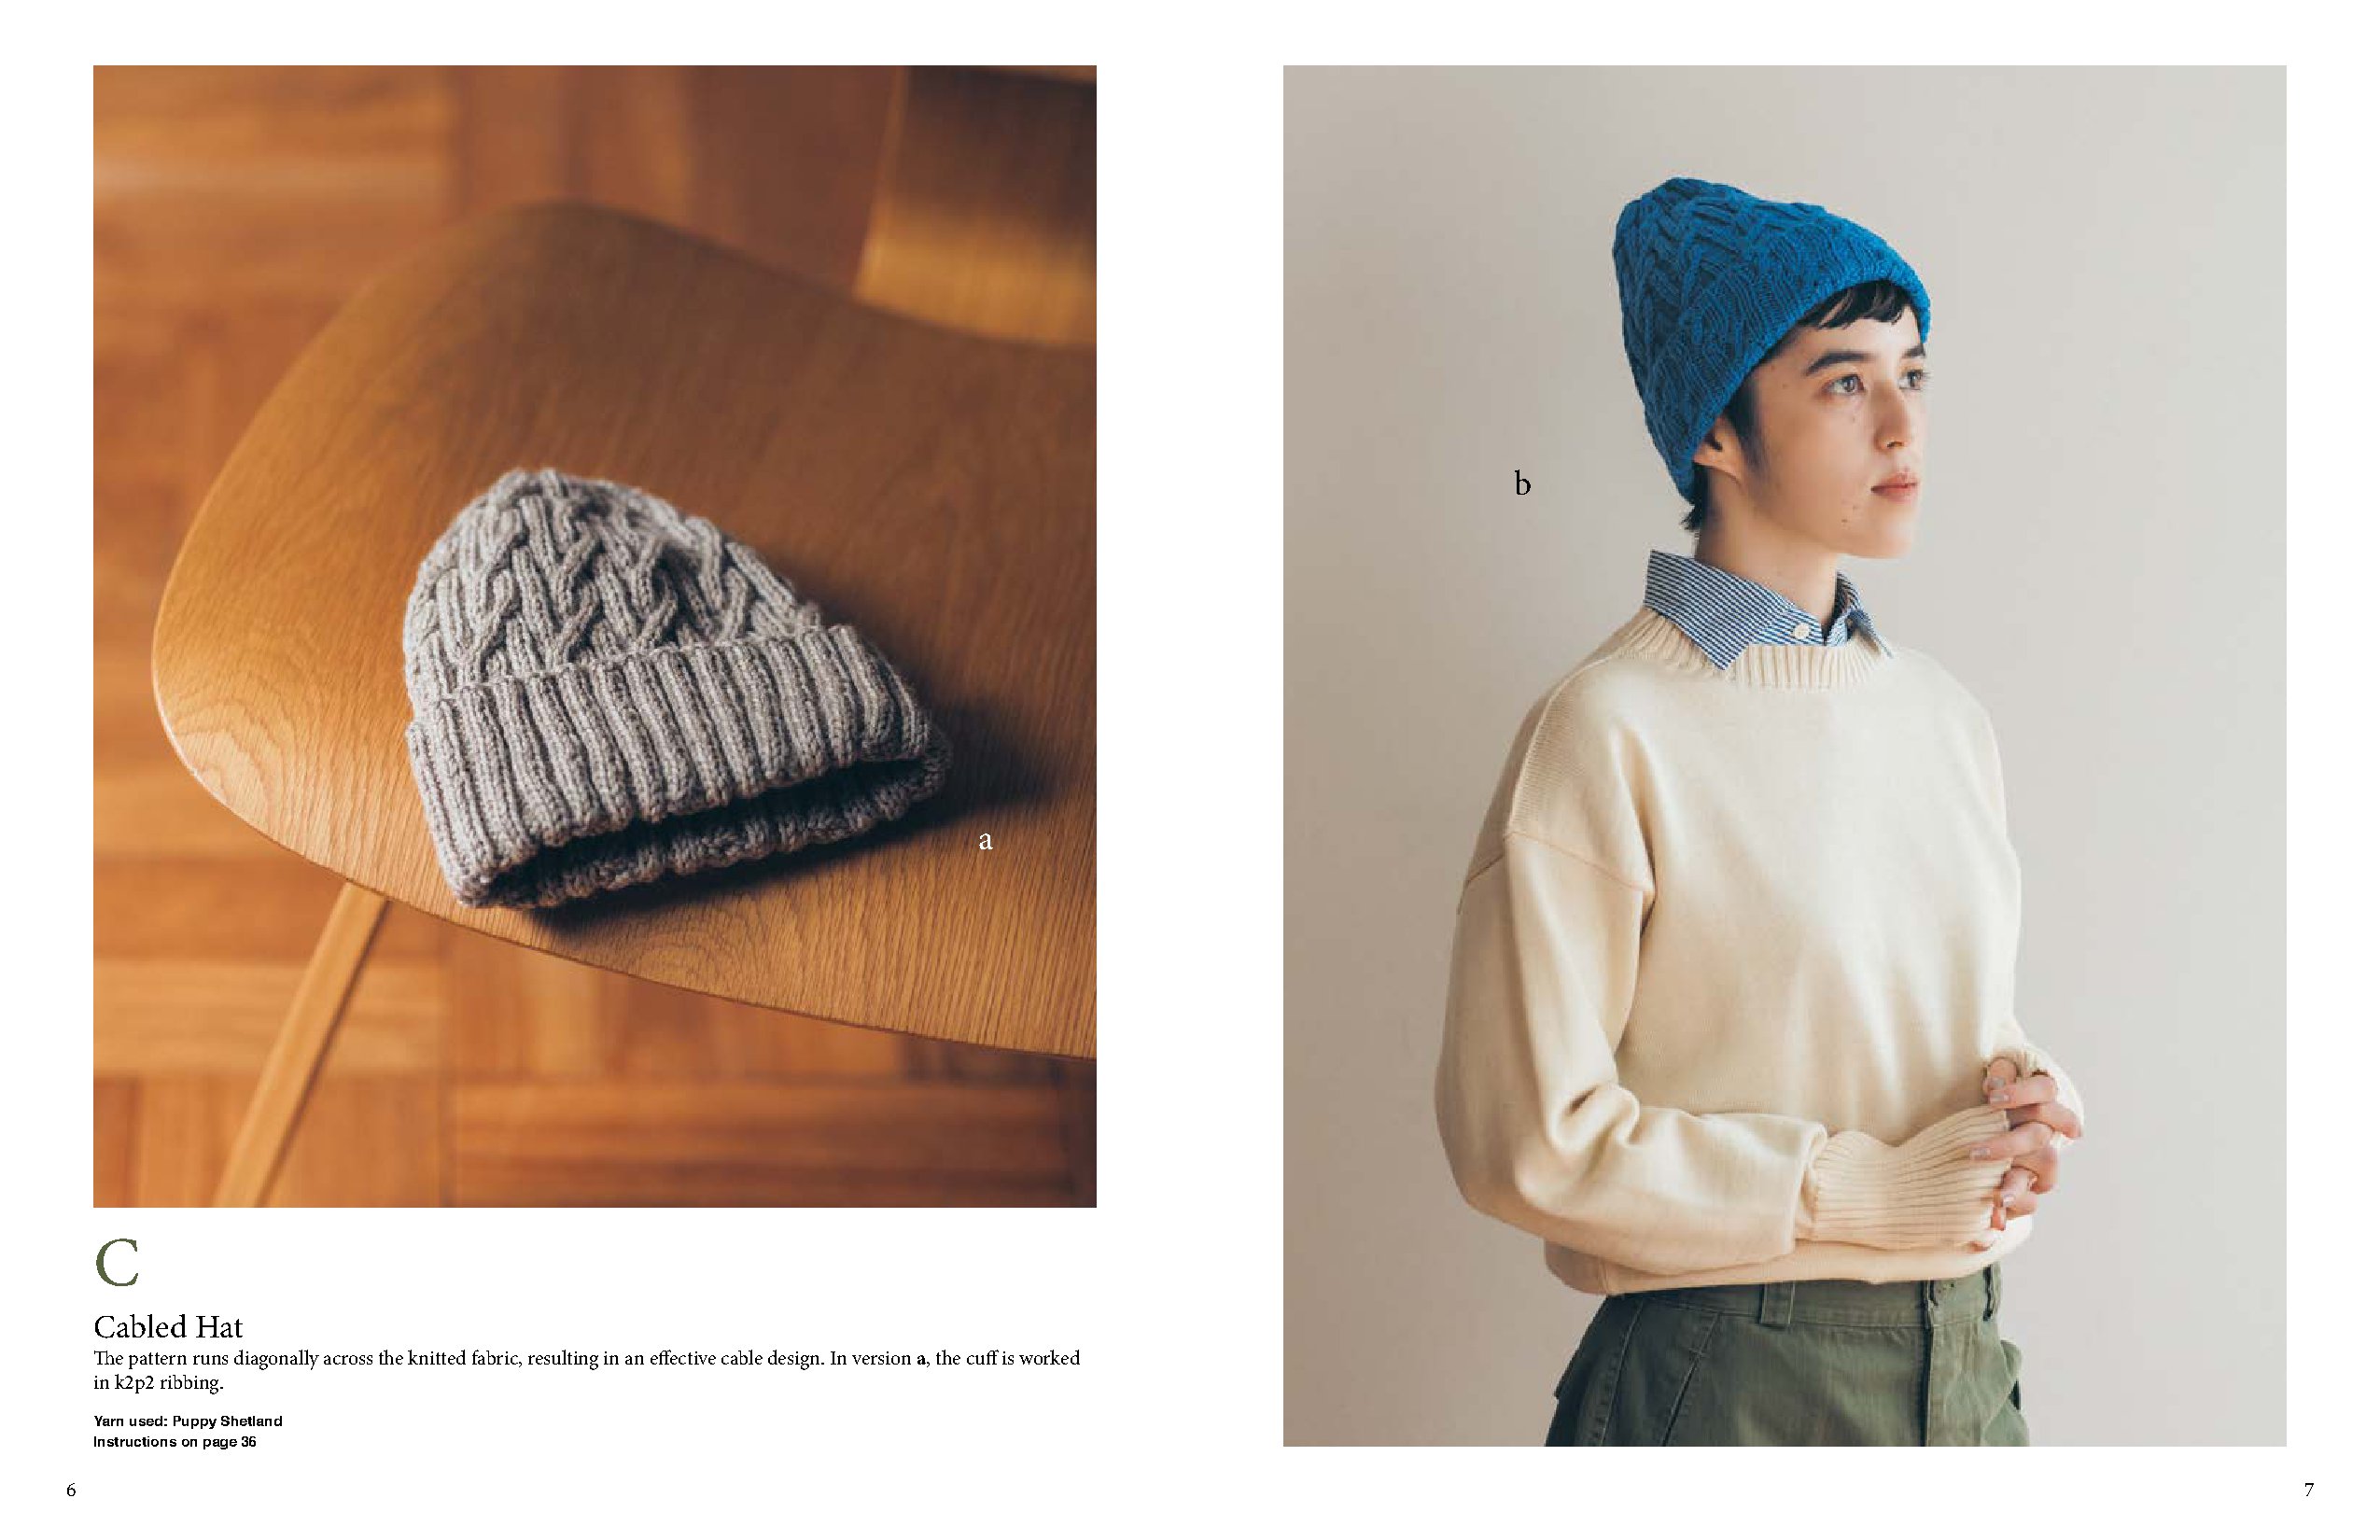 Small Knits: Casual & Chic Japanese Style Accessories